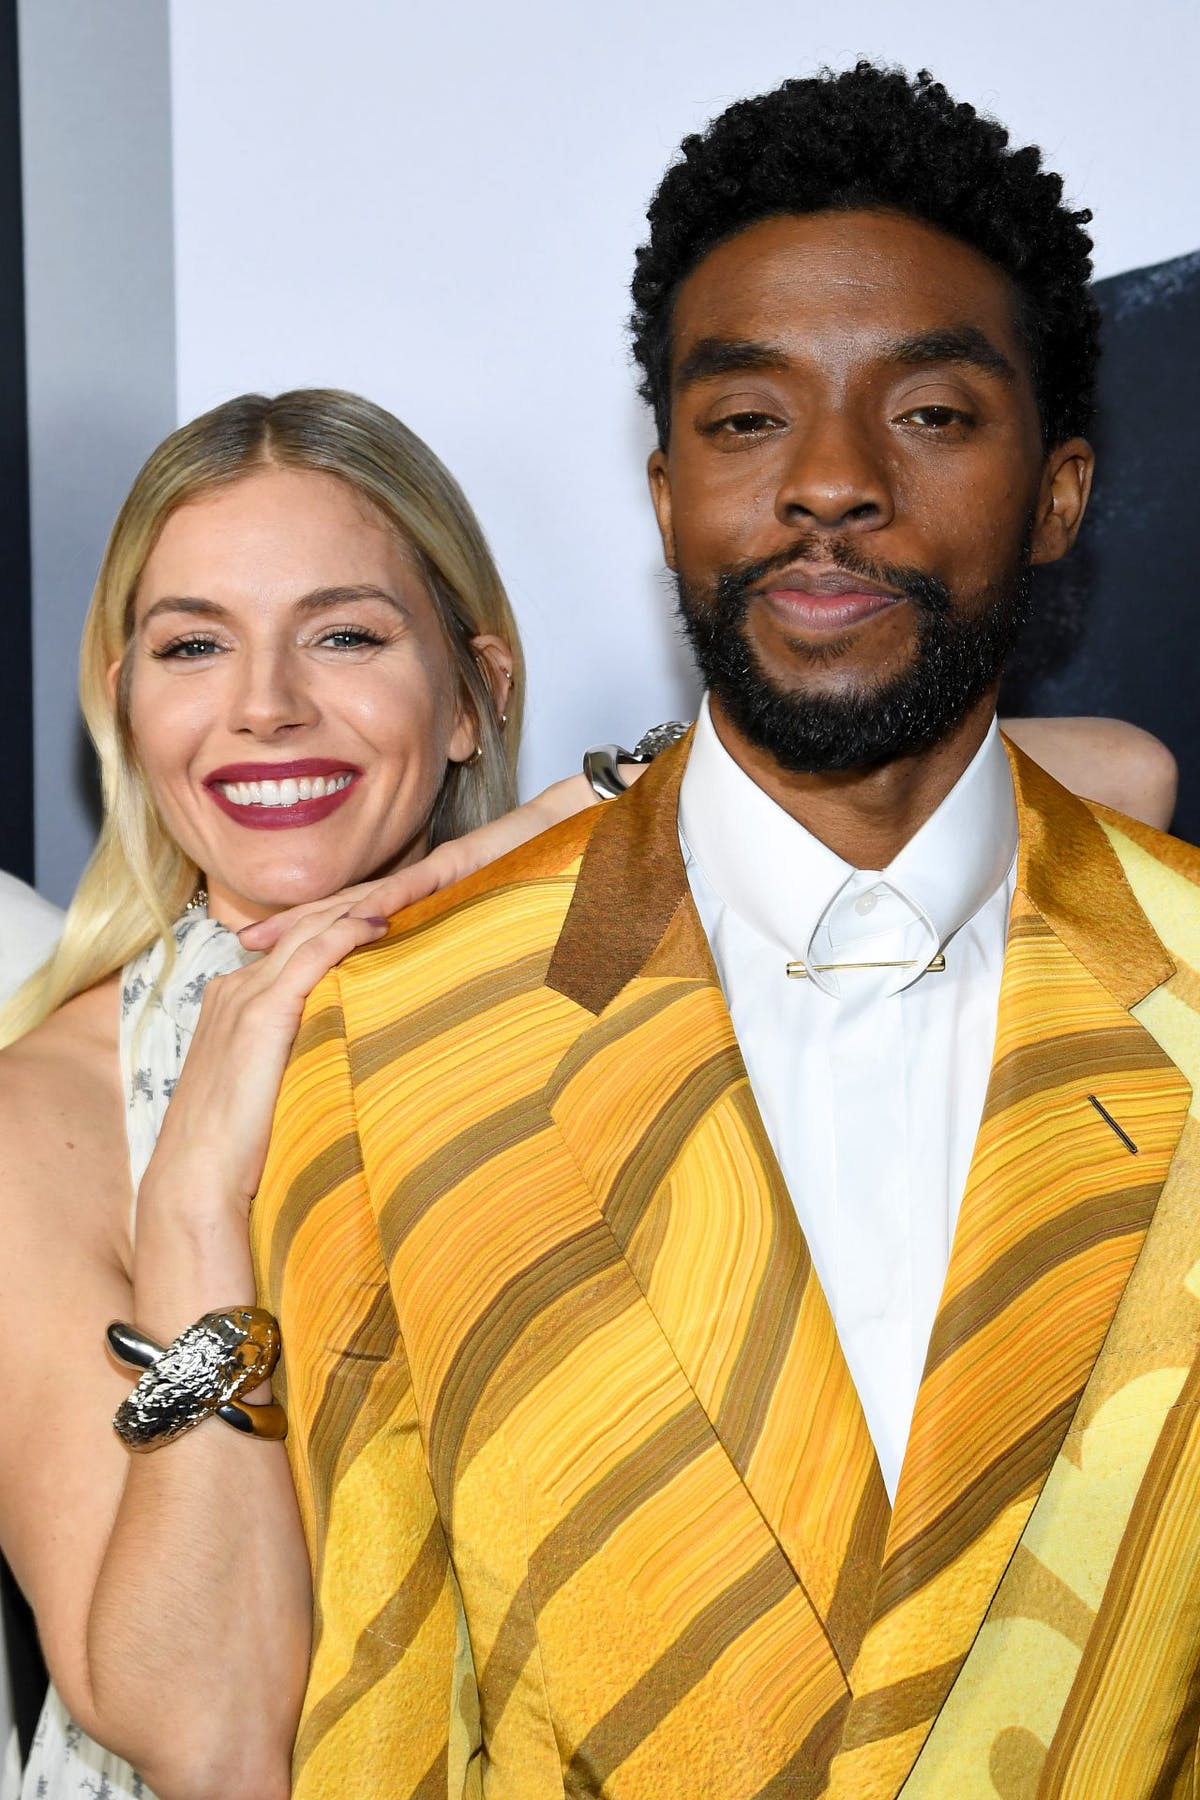 The big problem with Sienna Miller using the “mindset of being male”